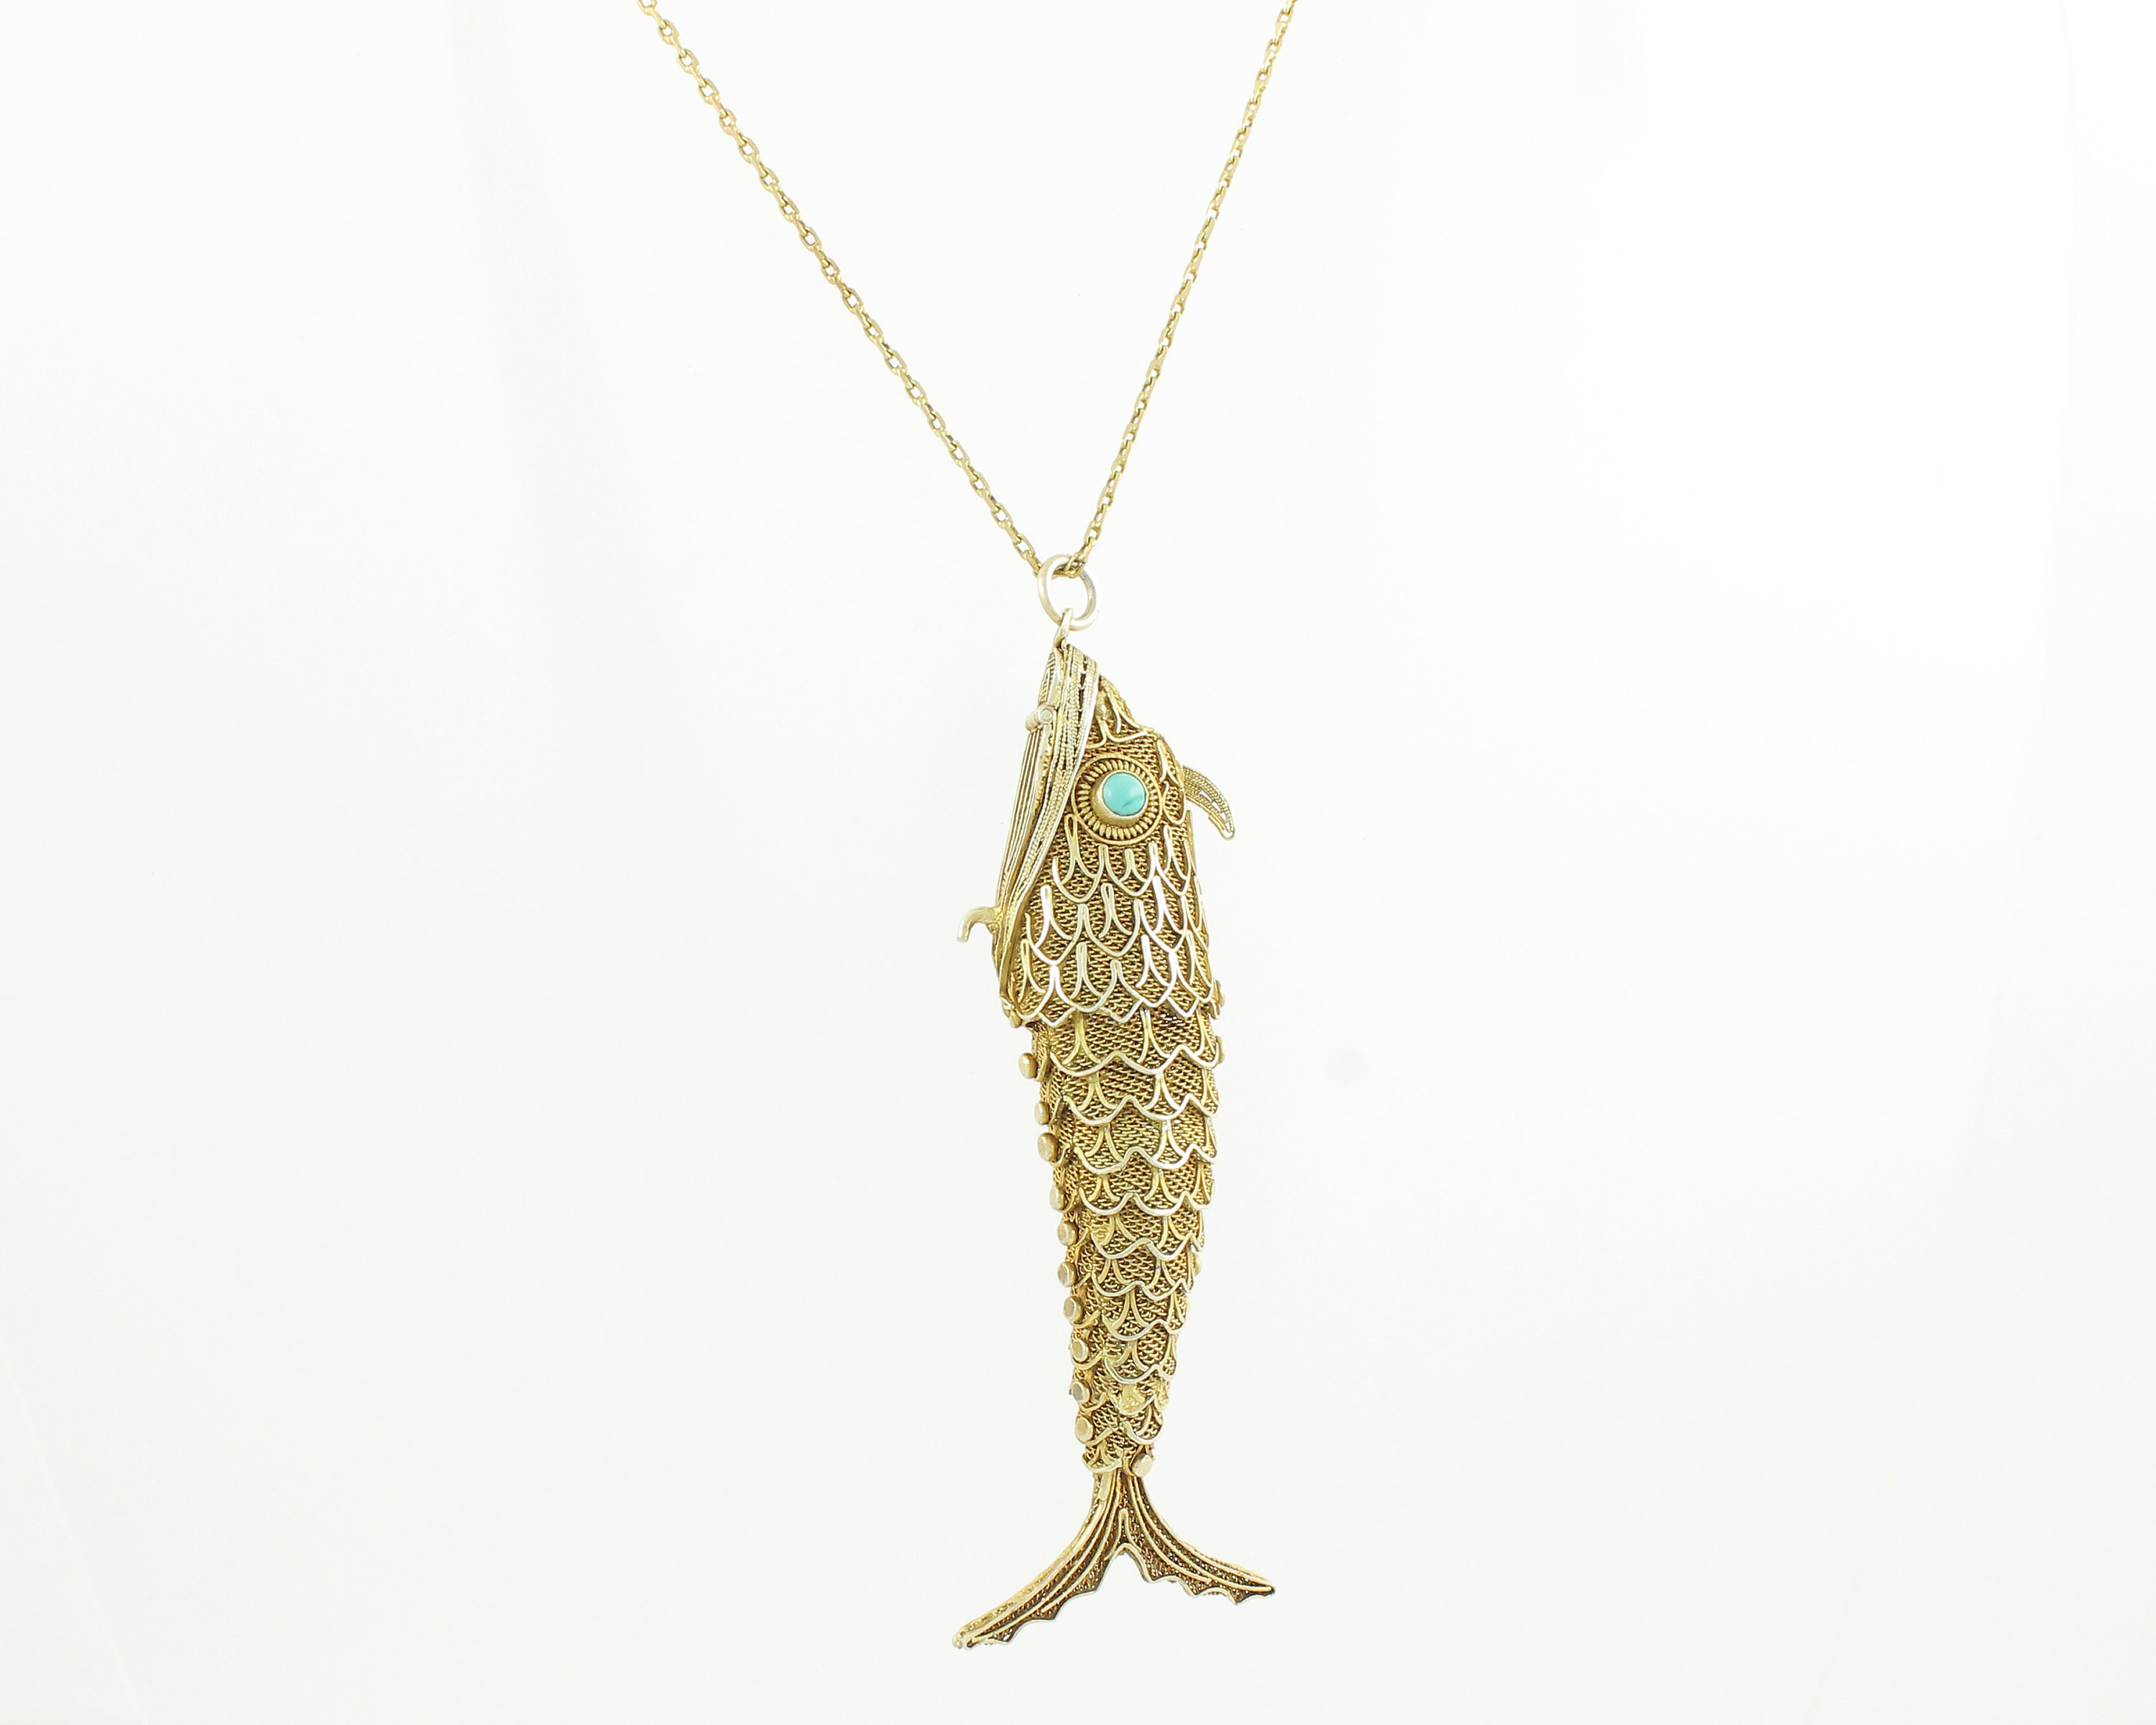 An articulated fish pendant and chain, in - Cheffins Fine Art